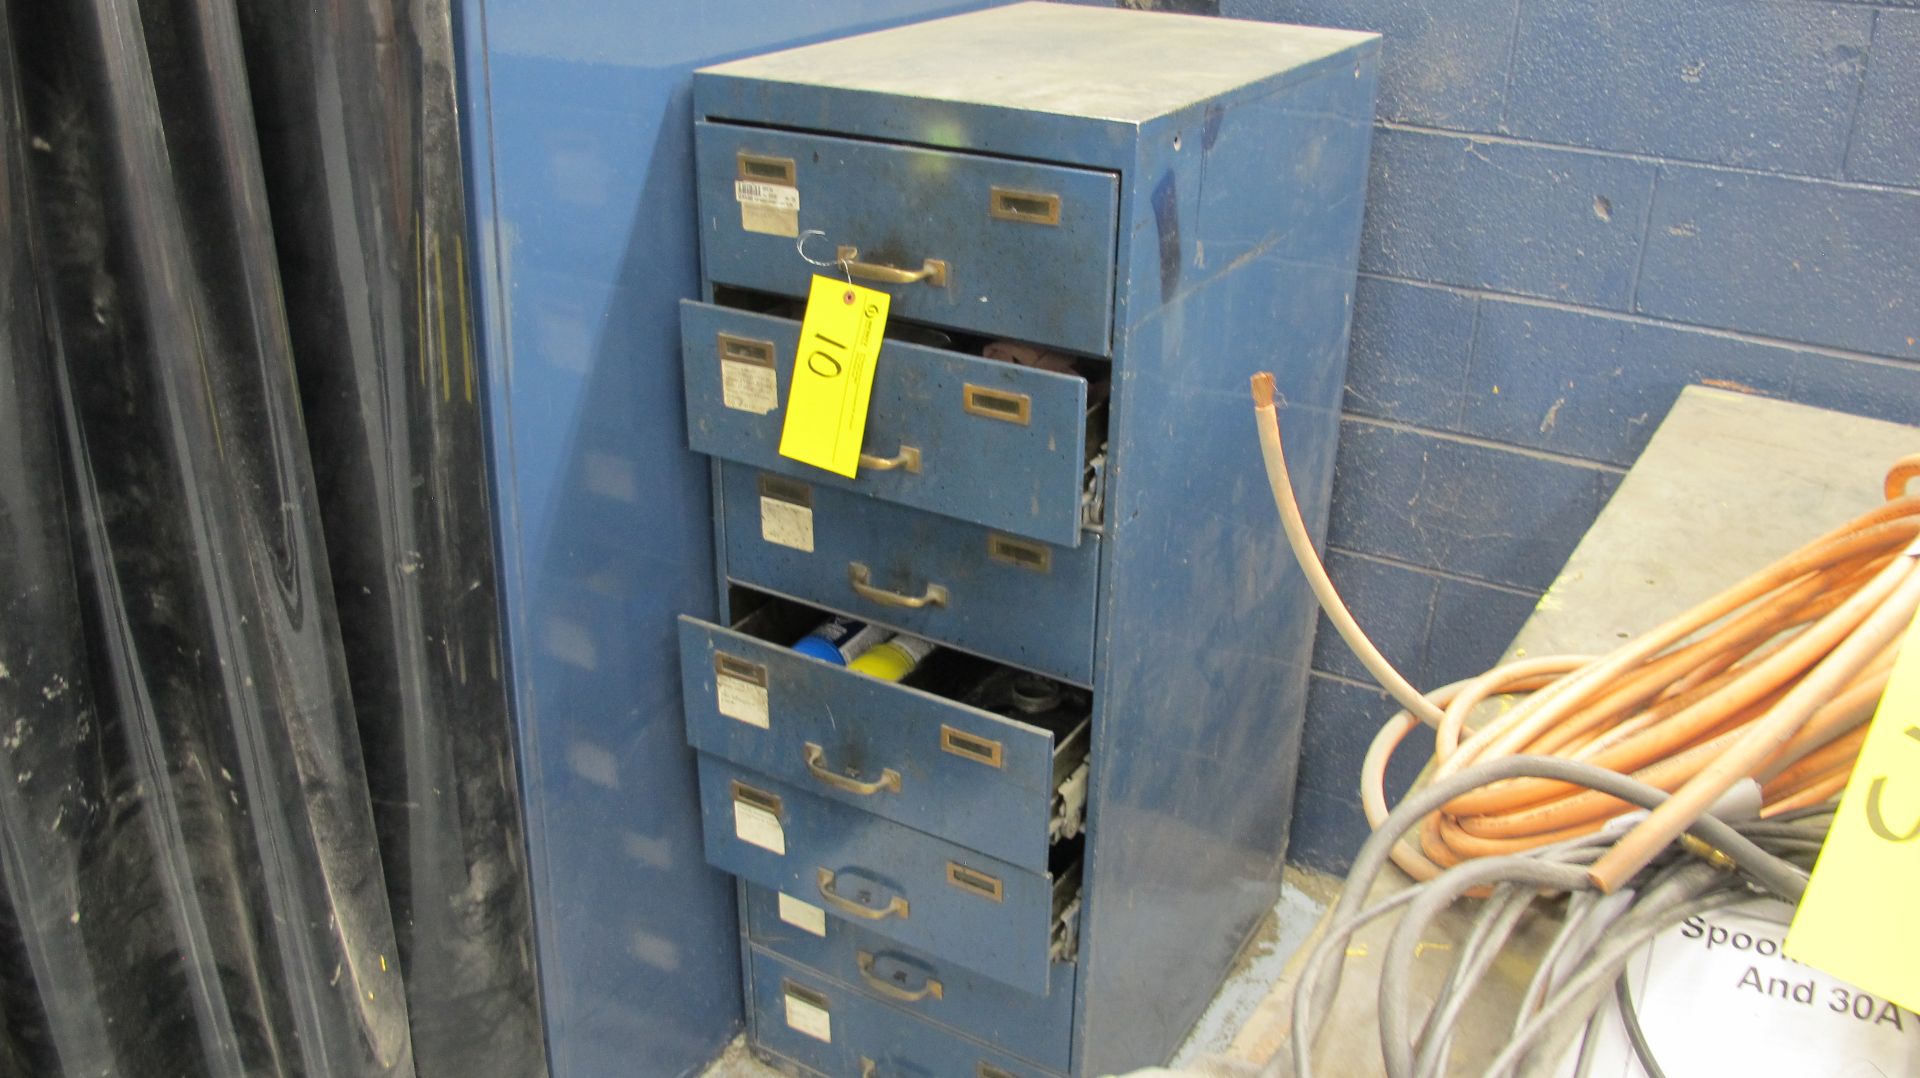 LOT OF WELDING ELECTRODES IN 10-LEVEL STORAGE CABINET AND WELDING SUPPLIES IN 2ND 10-LEVEL STORAGE - Image 10 of 14